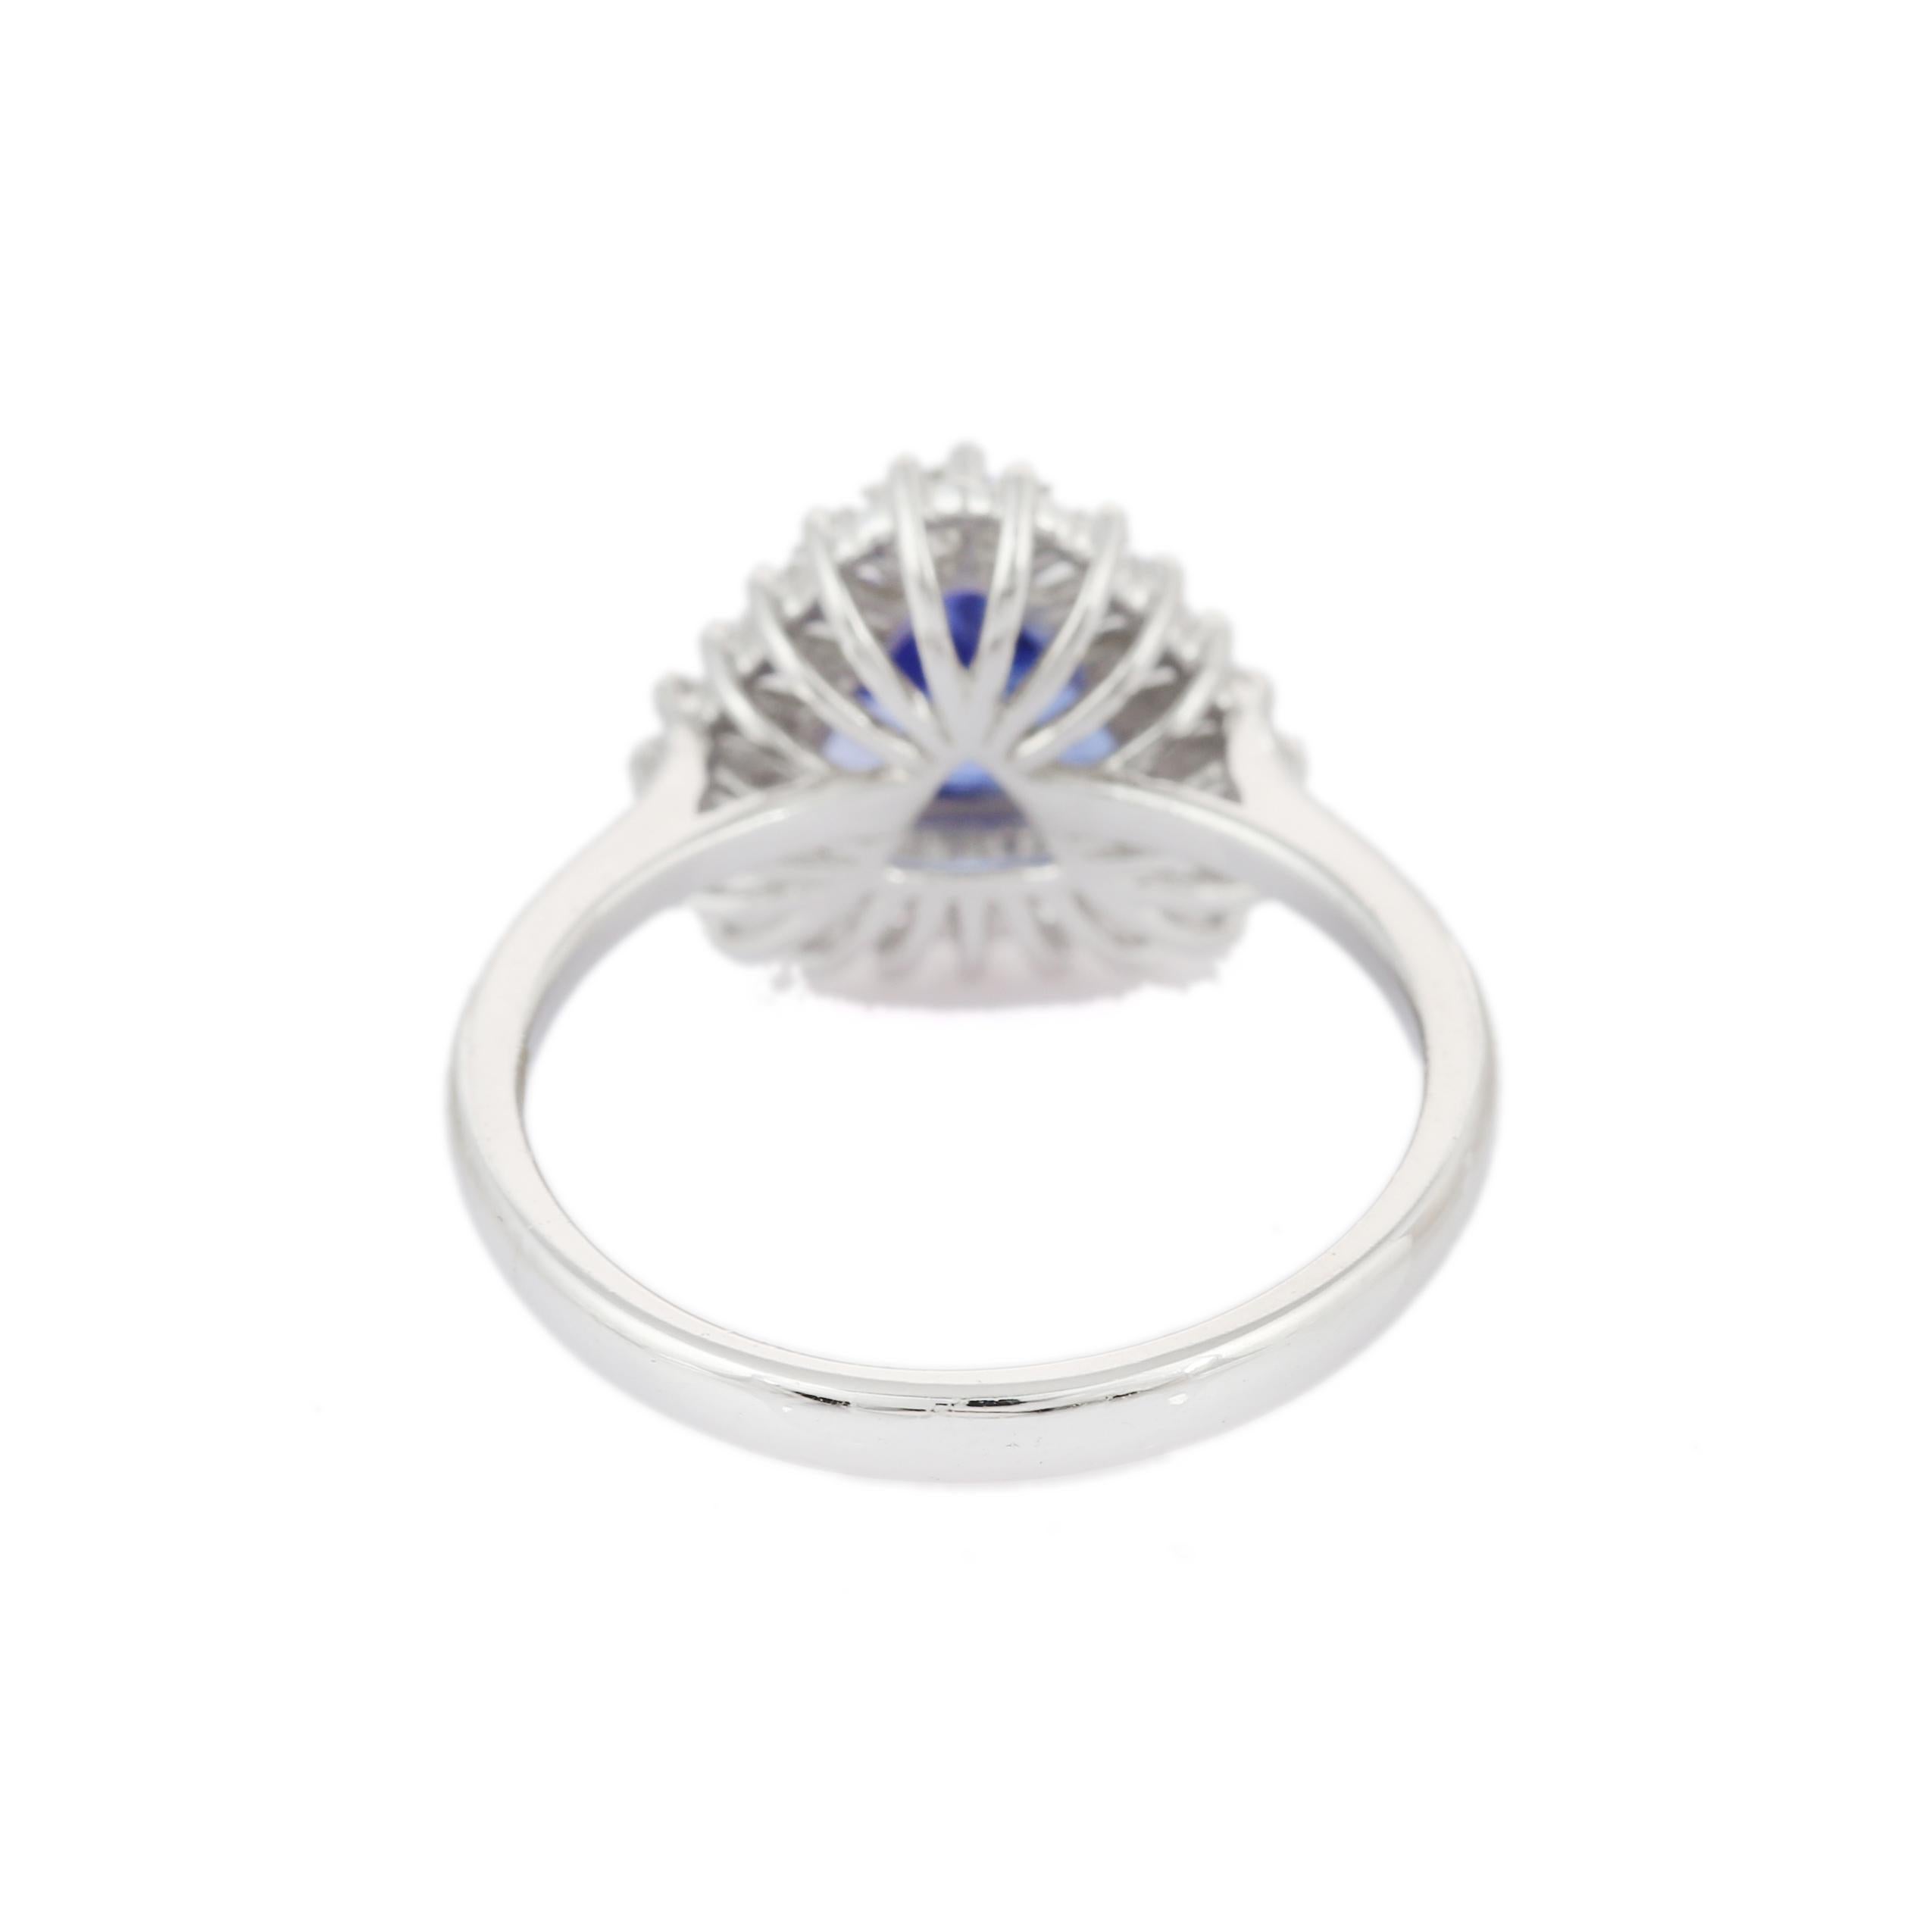 For Sale:  Tanzanite Diamond Gemstone Engagement Ring in 18K Solid White Gold  5